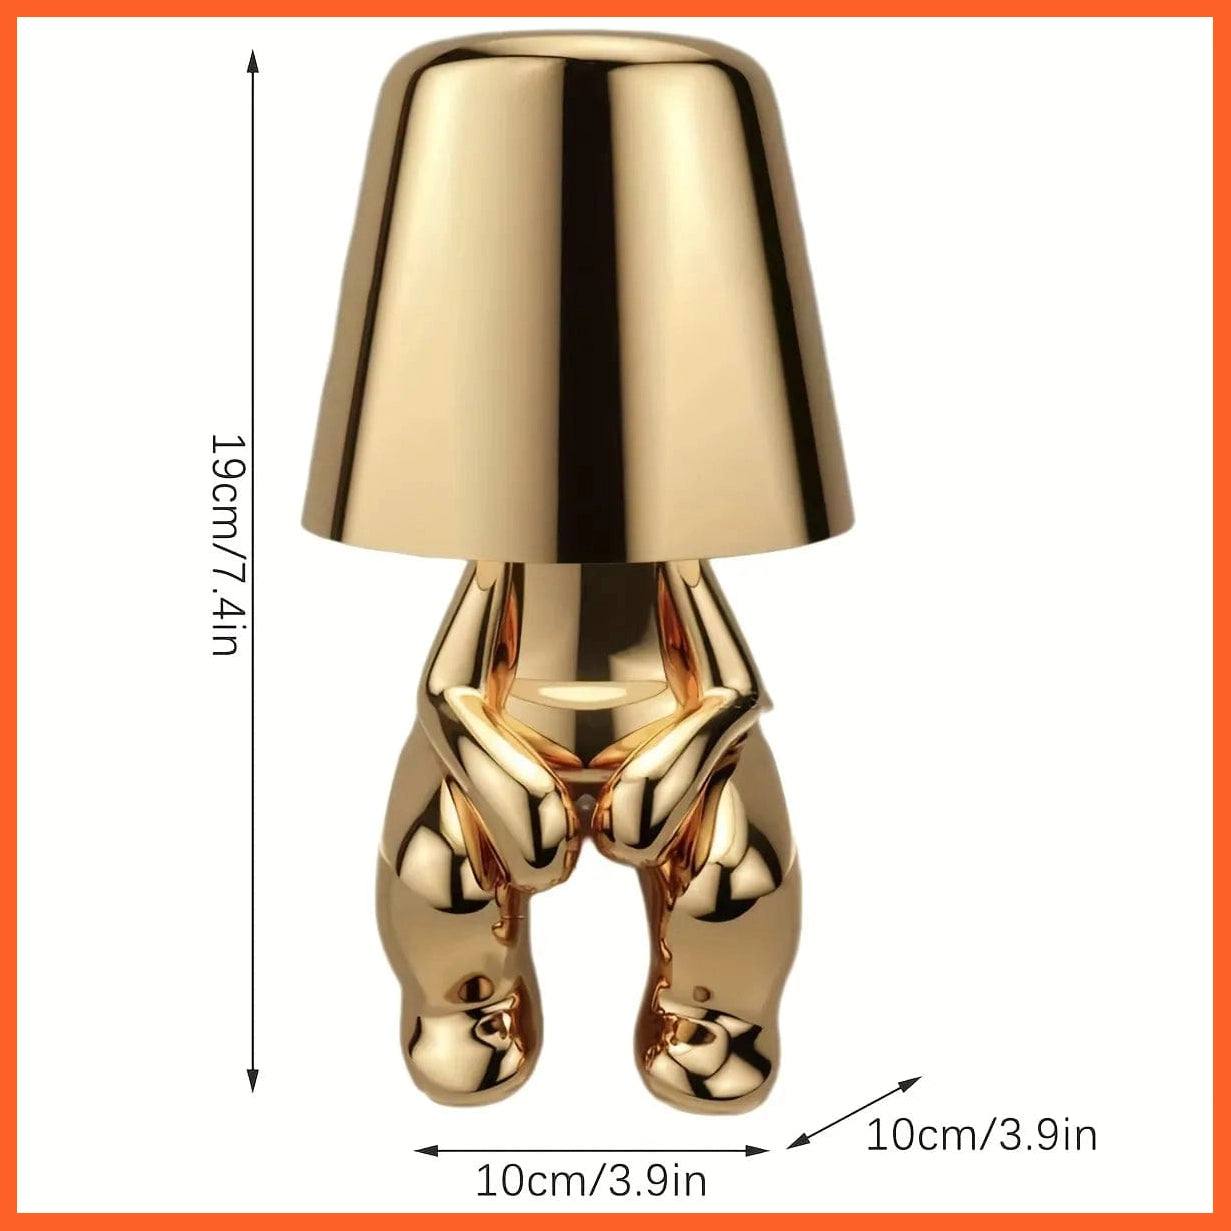 whatagift.com.au D Golden Color Thinker Statue LED Table Lamp With USB Port| Nightstand Lamp For Home, Living Room